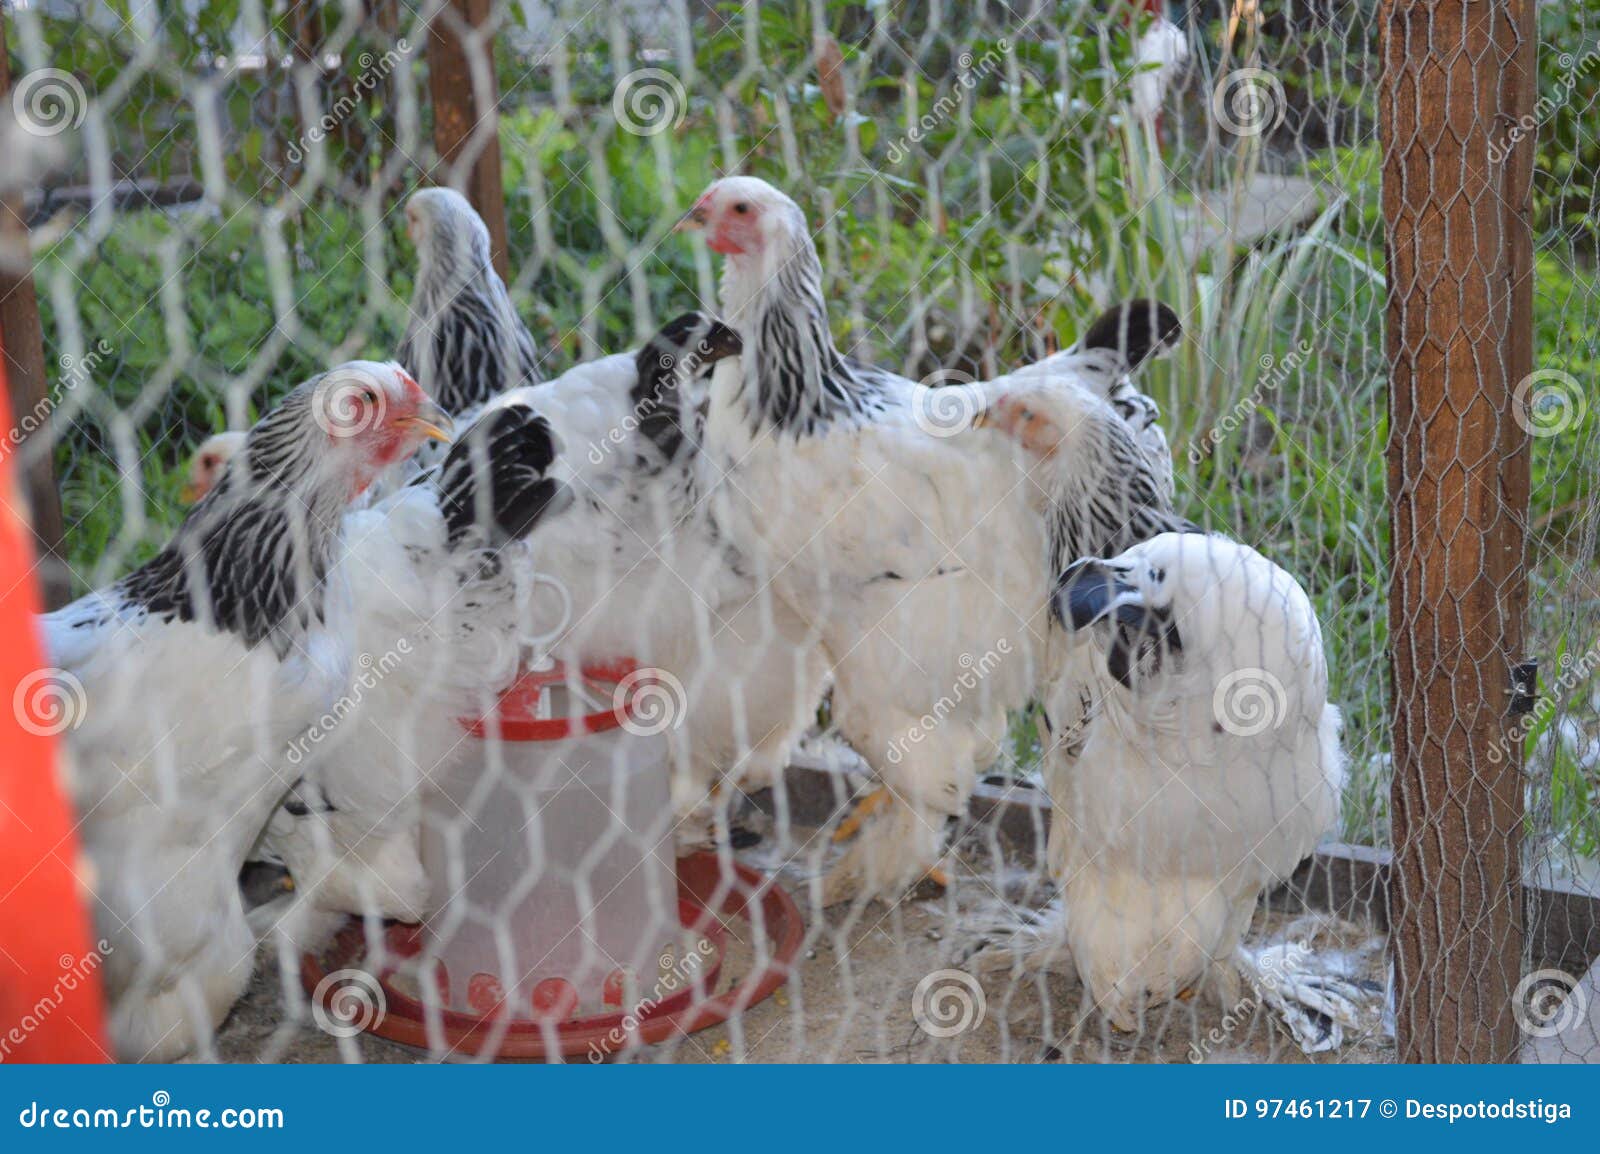 4+ Thousand Chicken Netting Royalty-Free Images, Stock Photos